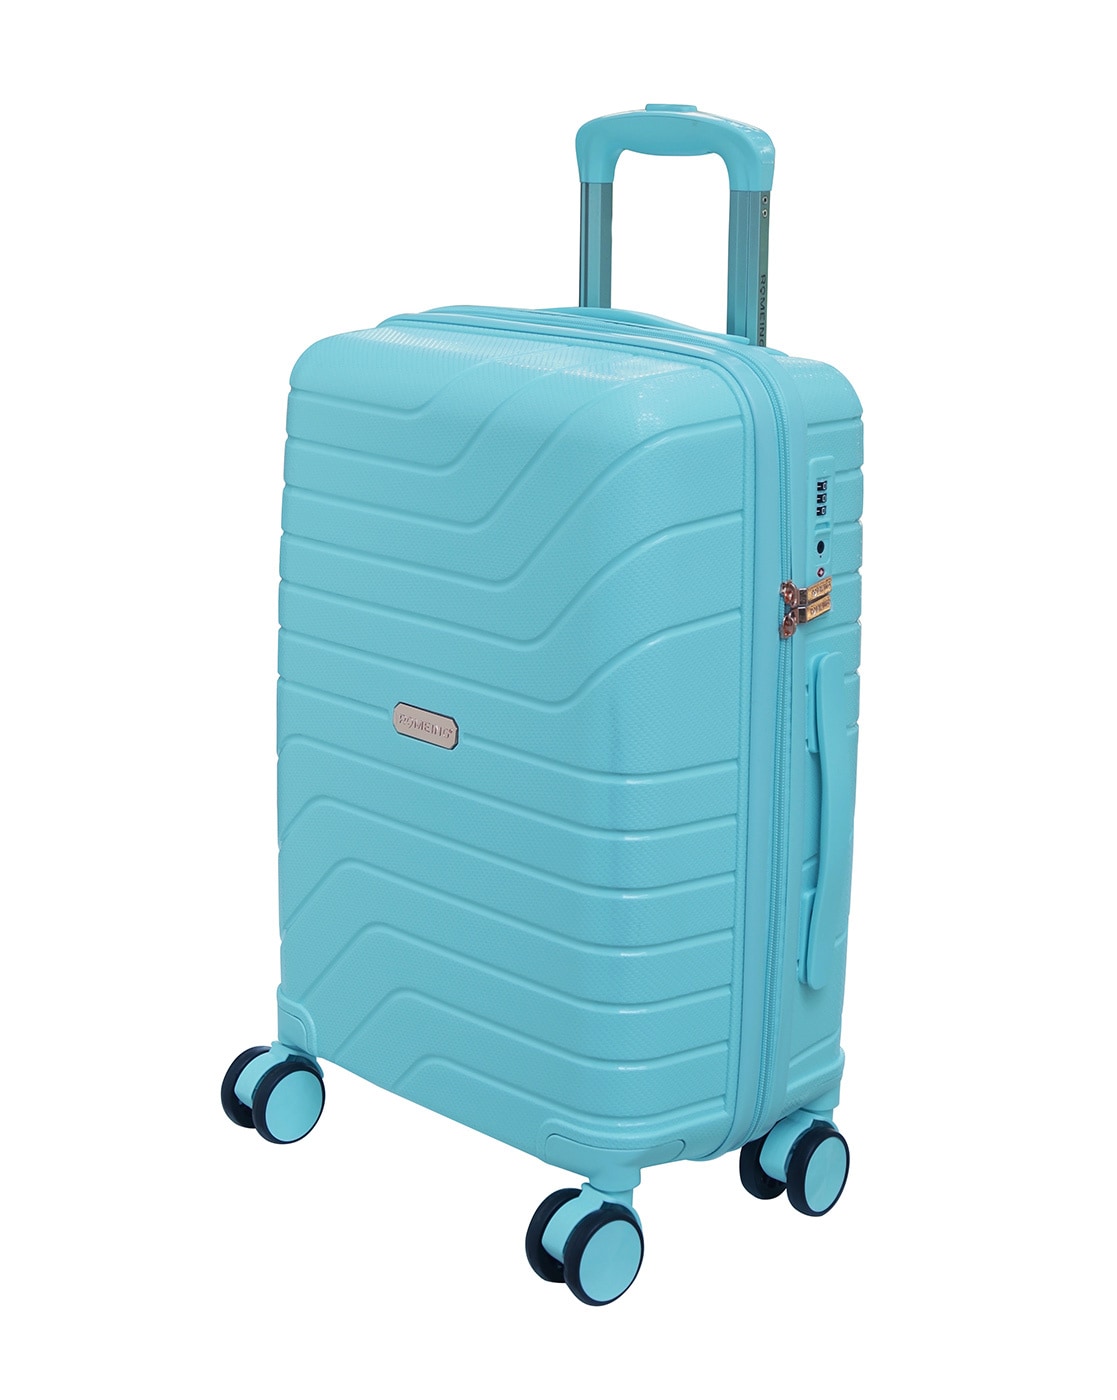 ROMEING Capri 20 inch, Polycarbonate Luggage, Hard-Sided, (Gold 55 cms)  Cabin Trolley Bag : Amazon.in: Fashion